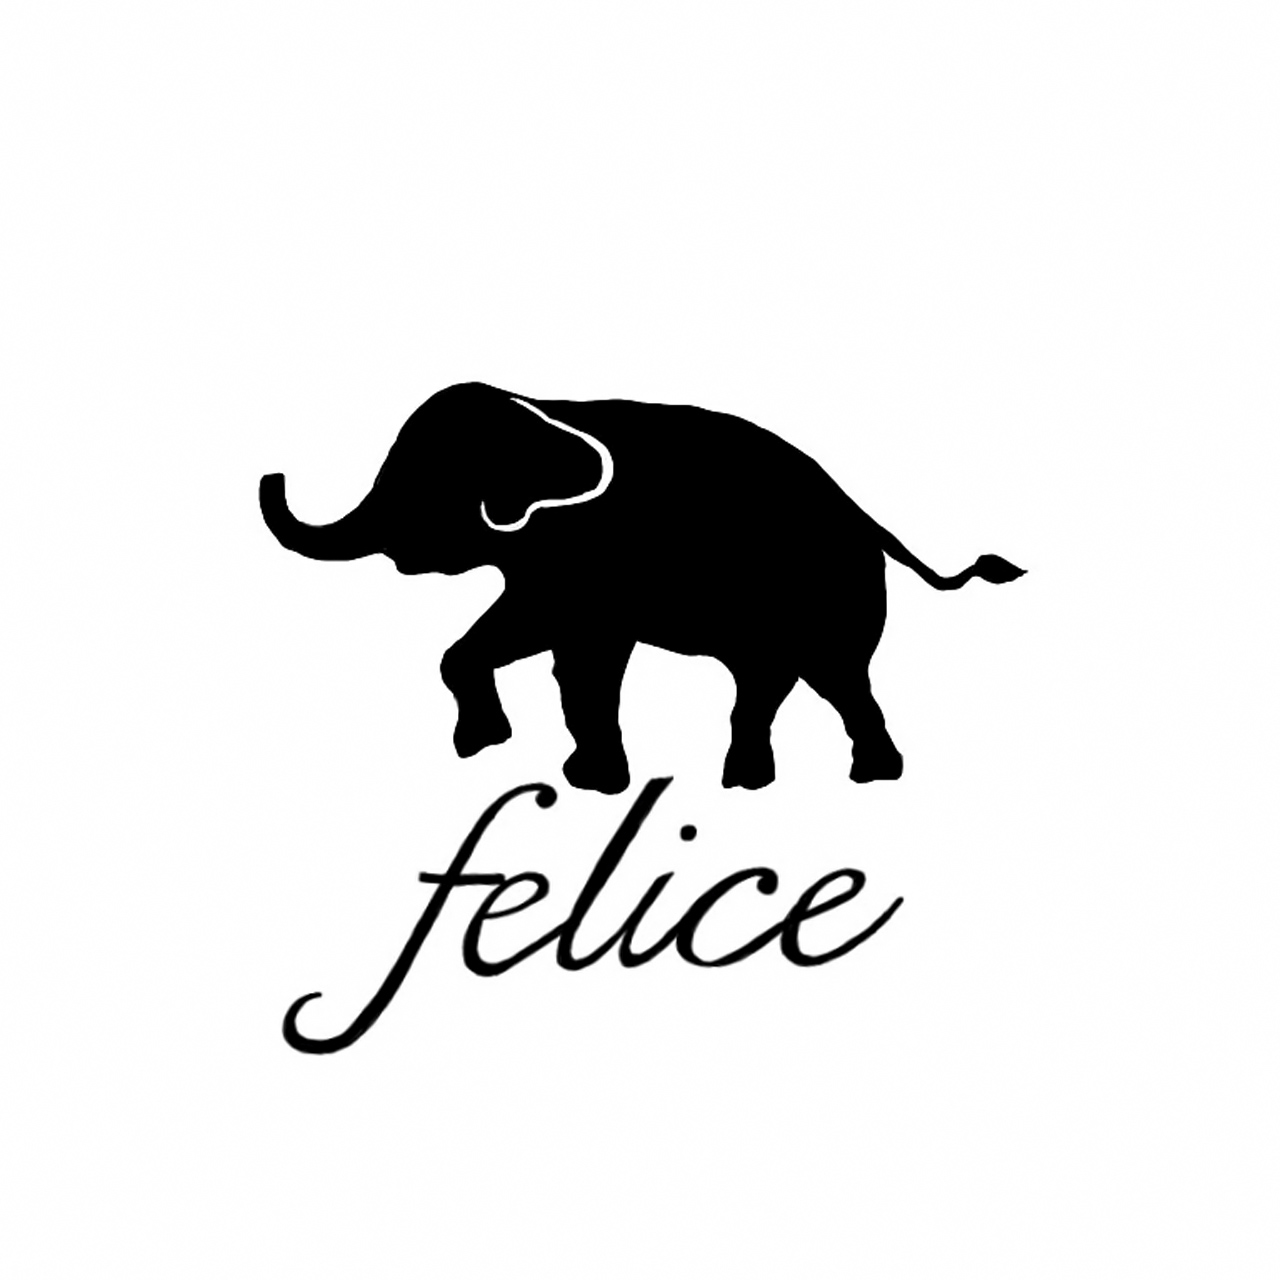 felice - フェリーチェ